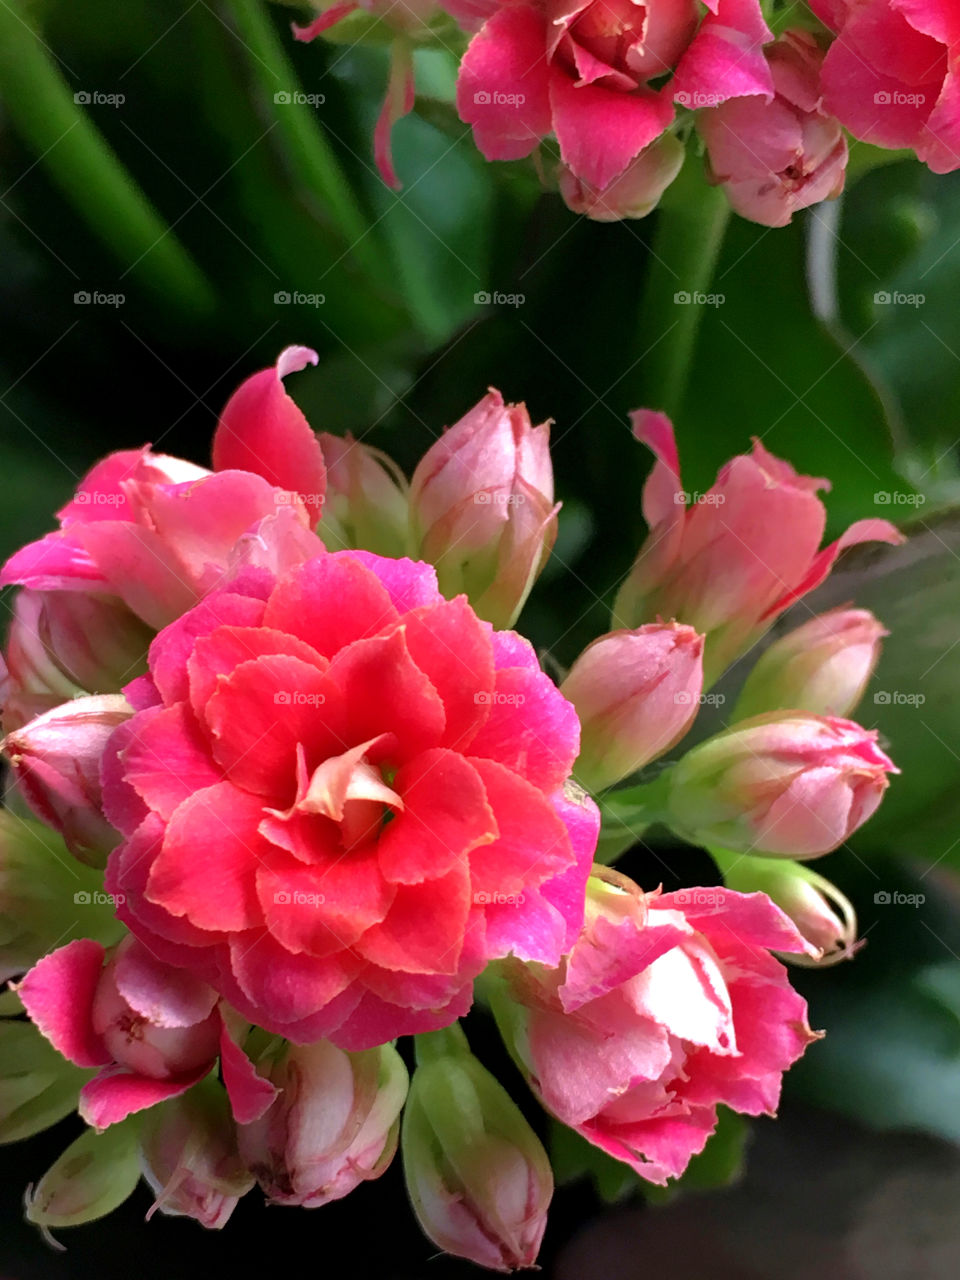 Red flowers, kalanchoe plant